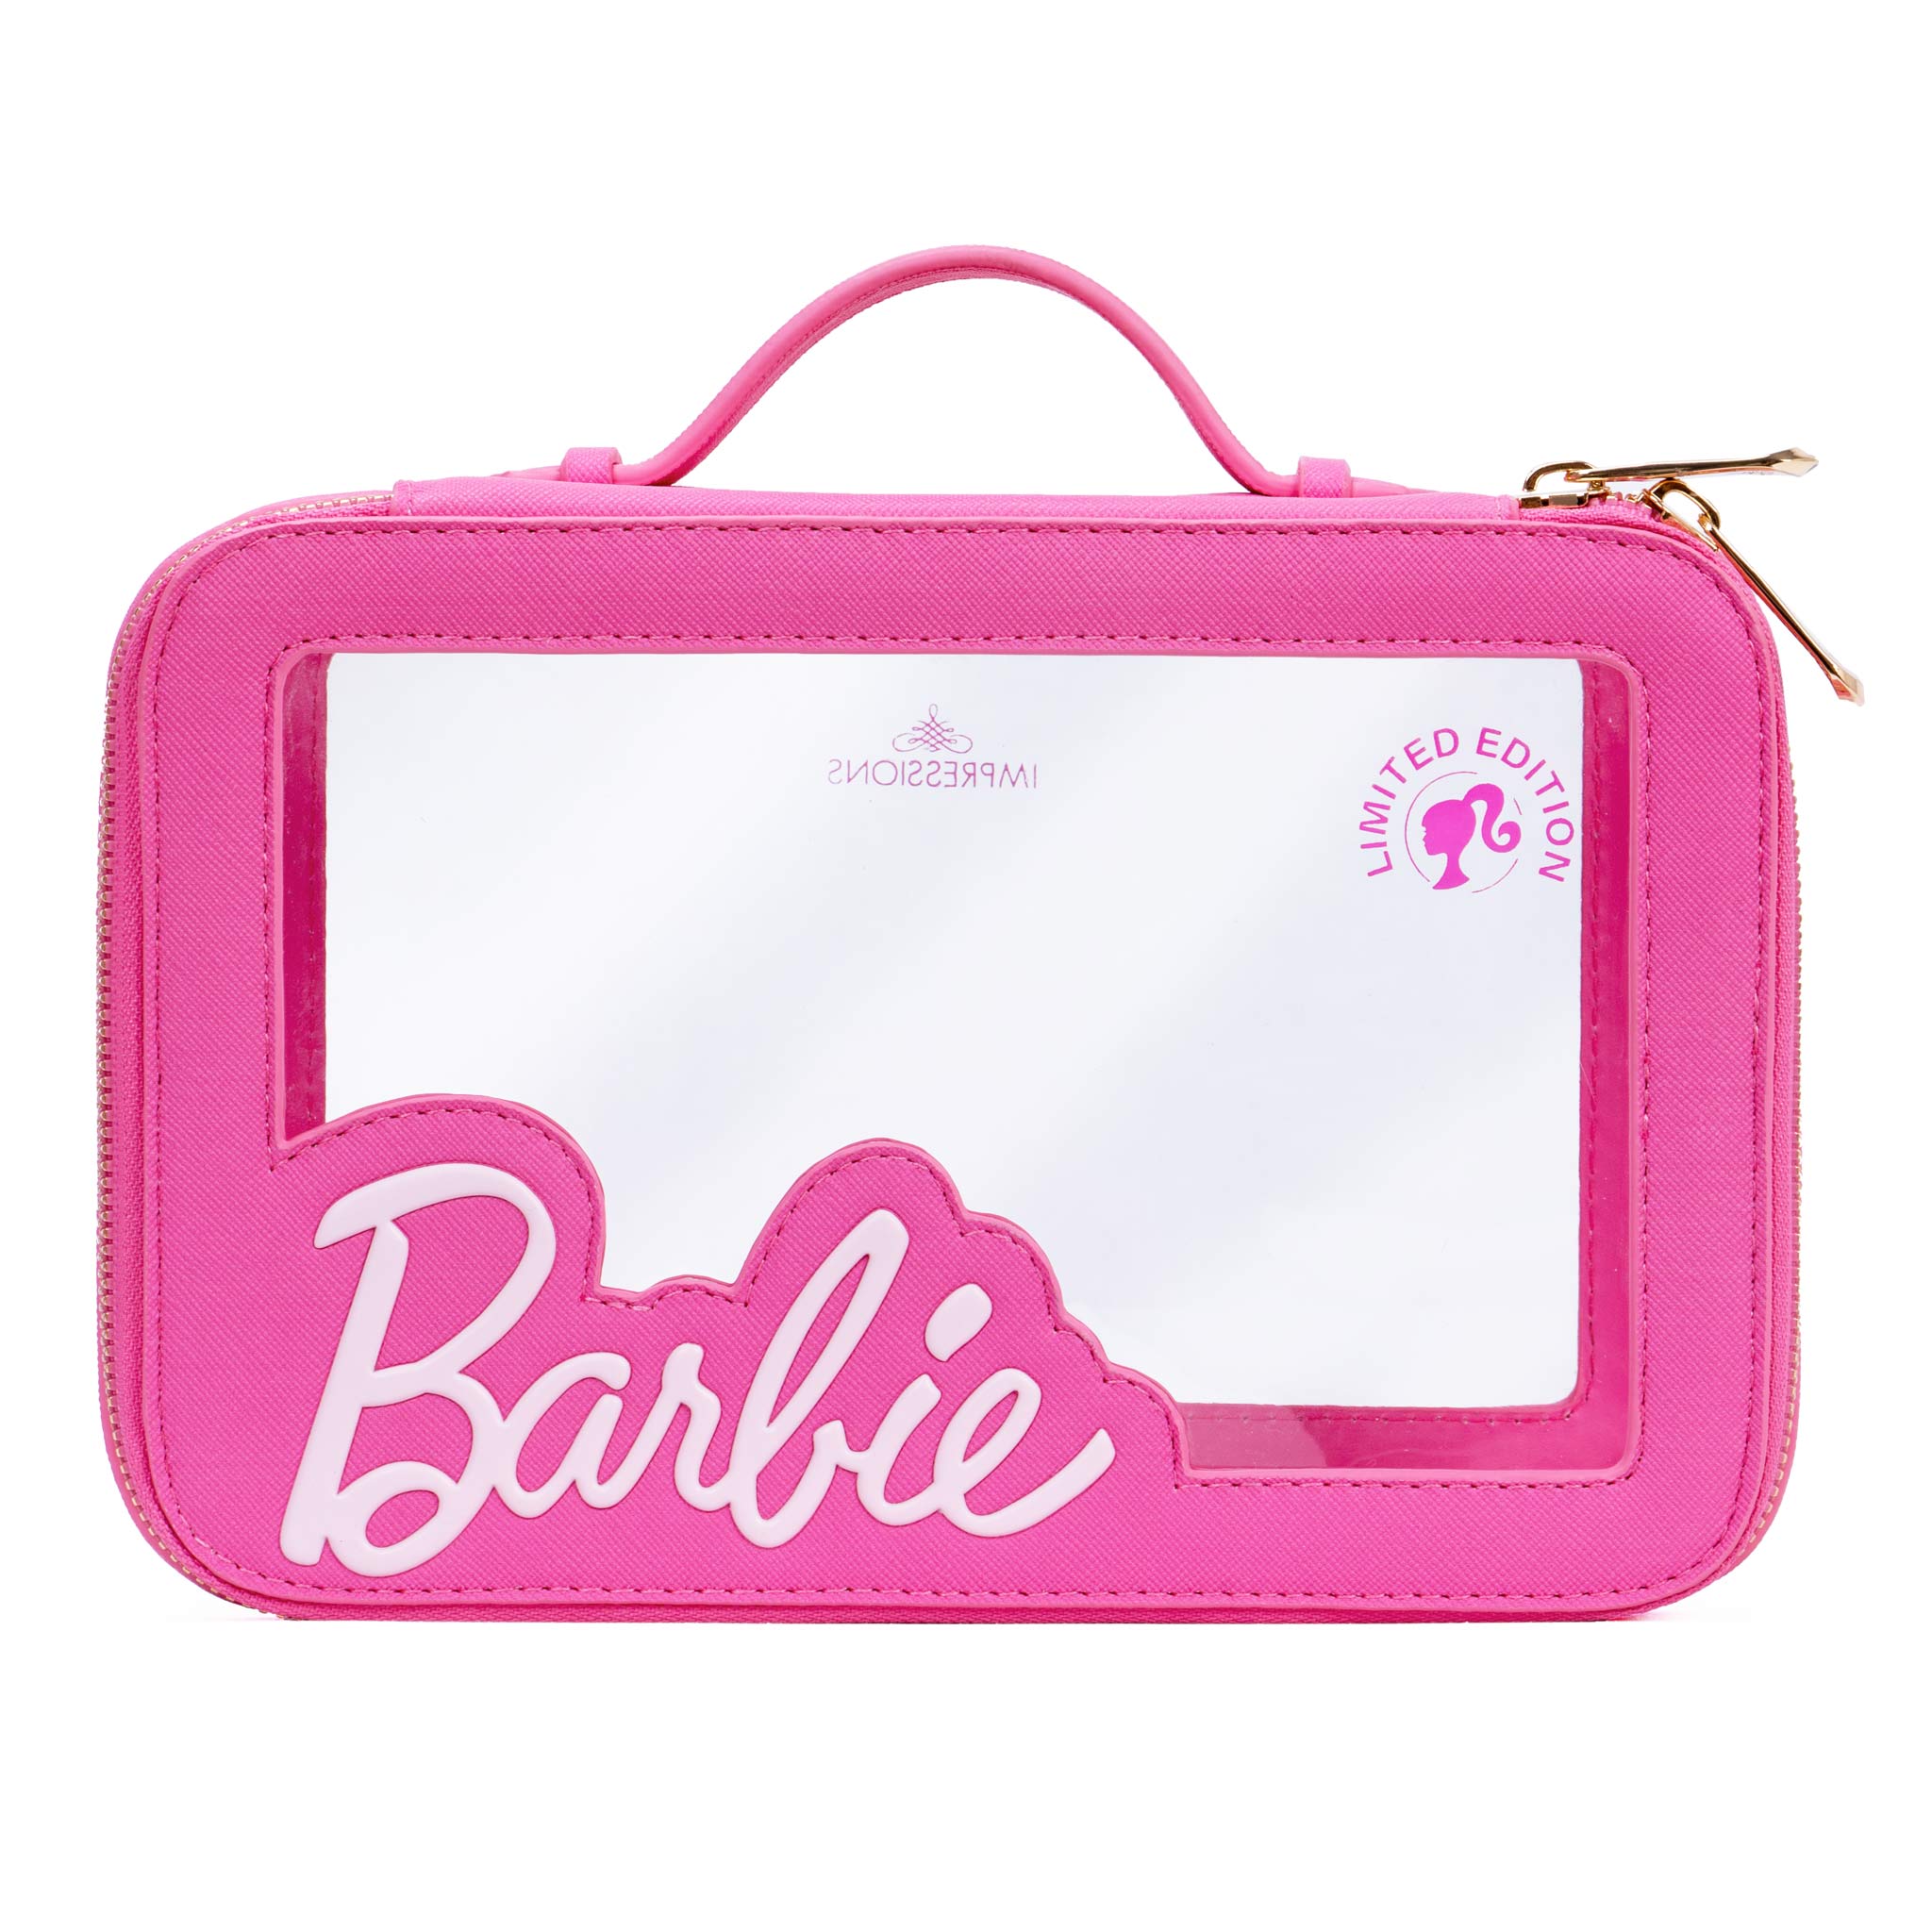 Barbie Travel Makeup Case for Girls Waterproof Vinyl Clear Cosmetic Bag Organizer with Golden Zipper Impressions Vanity · Company